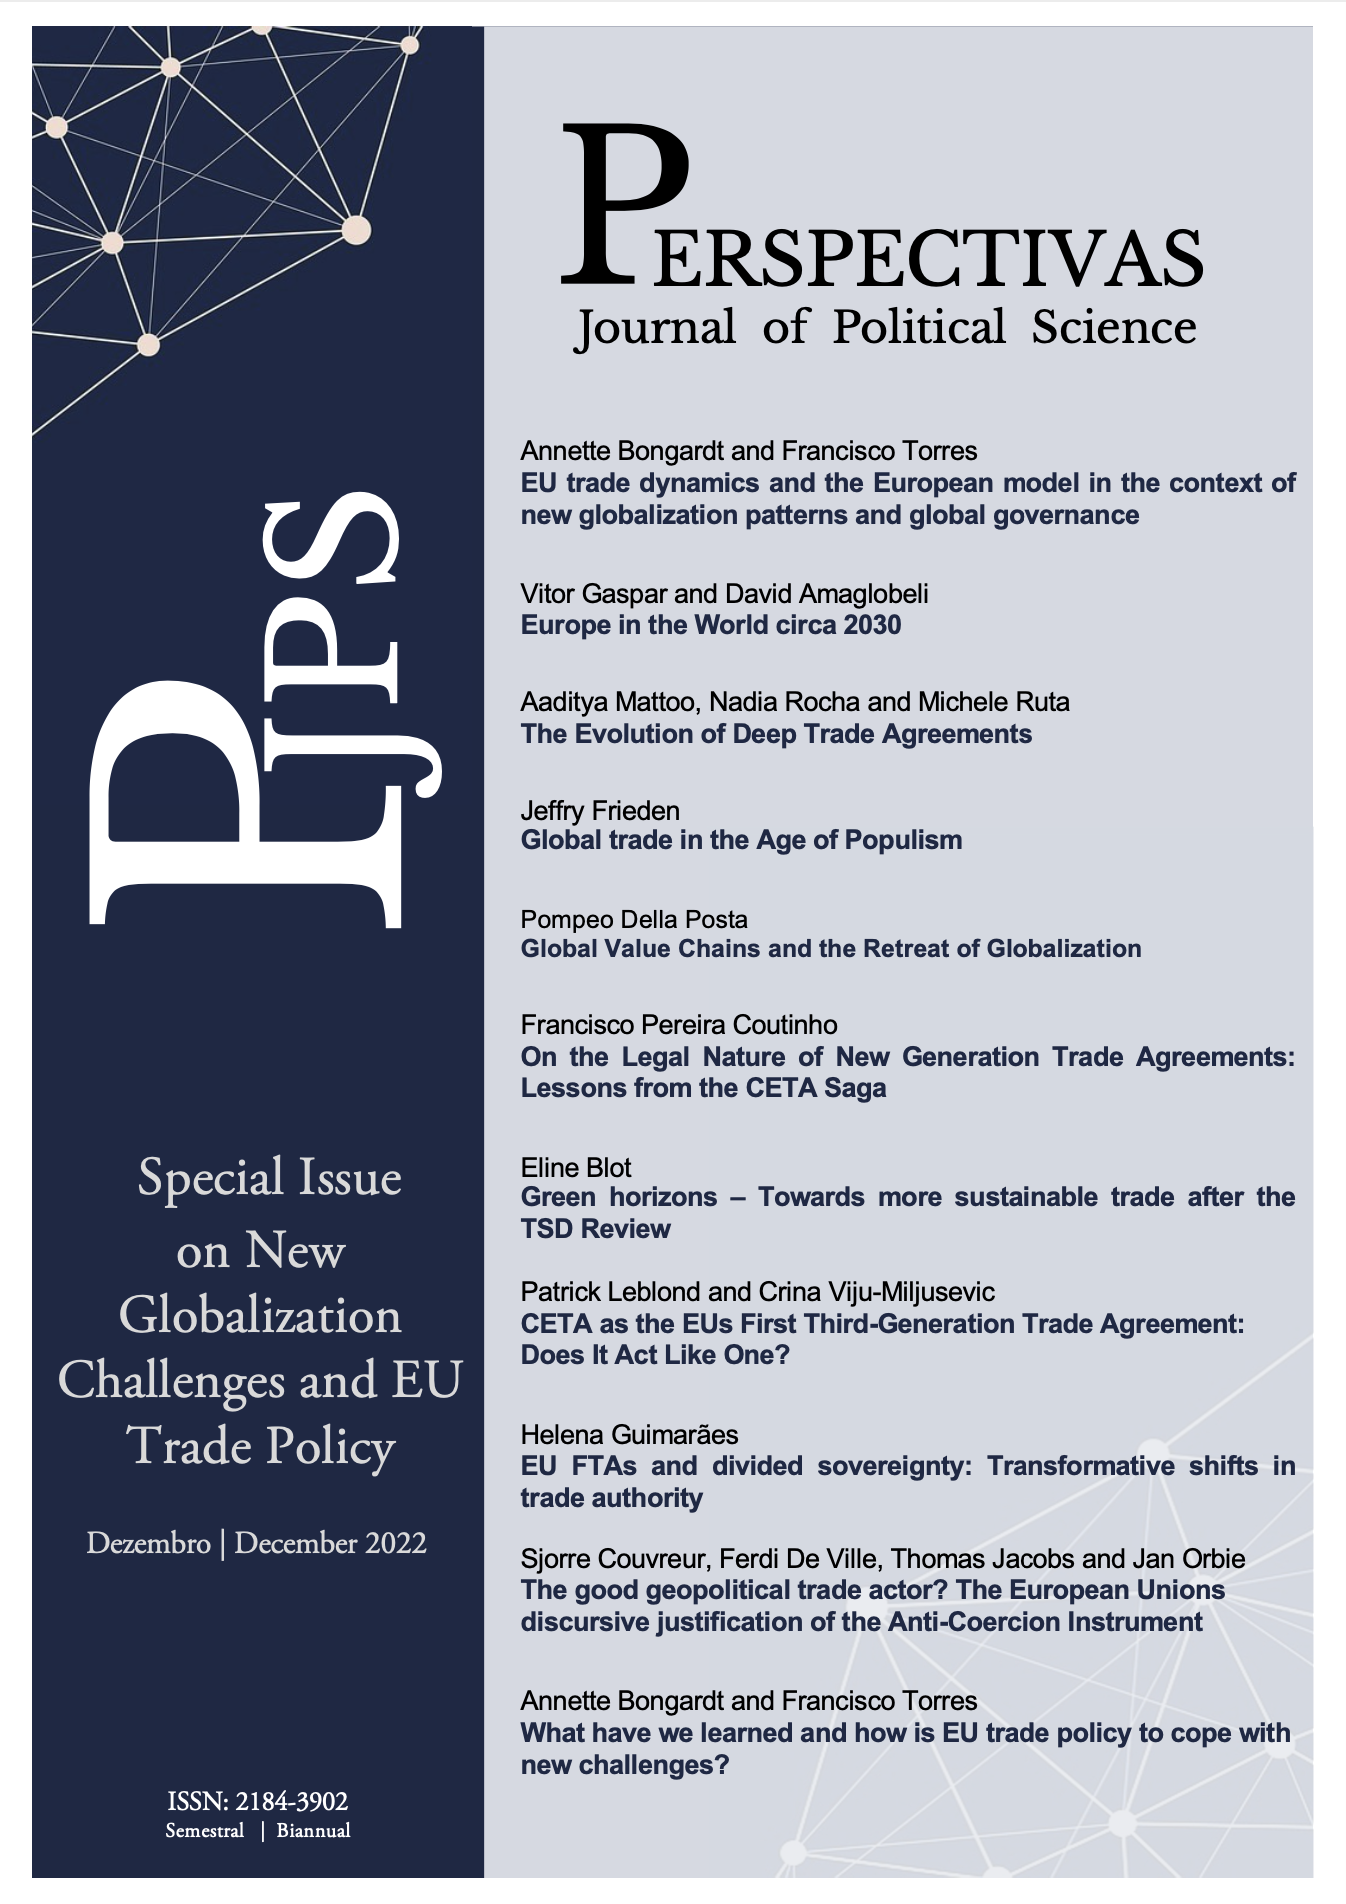 					View Vol. 27: Special Issue on New Globalization Challenges and EU Trade Policy  edited by Annette Bongardt (CICP, U. Évora) and Francisco Torres (CLSBE, U. Católica, Lisbon)
				